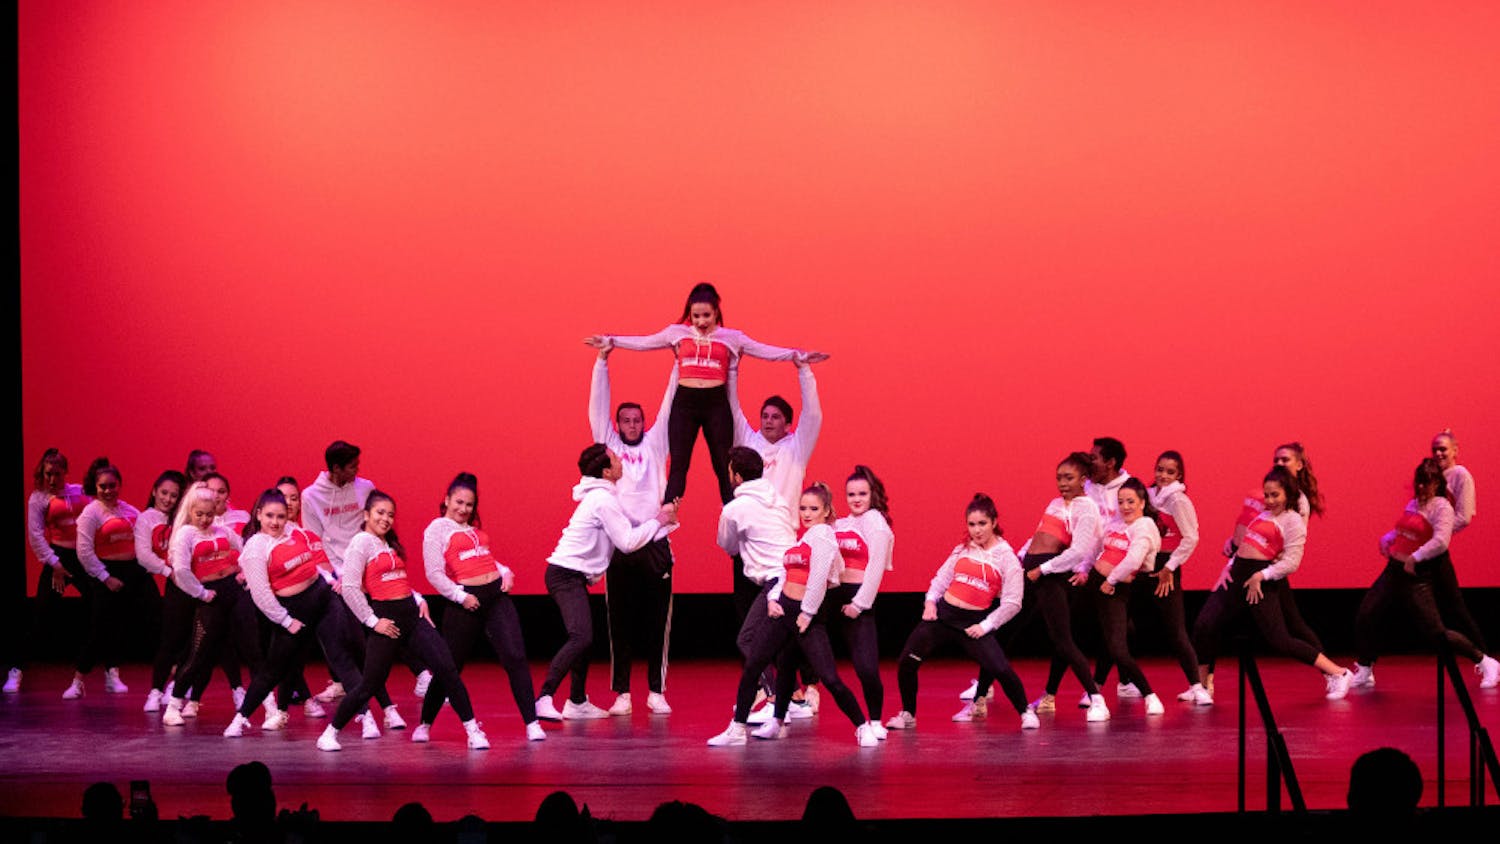 Sabor Latino, a Latino dance club at UF, starts their routine at the 2019 Soulfest, which is hosted as a part of Gator Growl in an effort to showcase and celebrate the diversity and talent among the students at UF. 